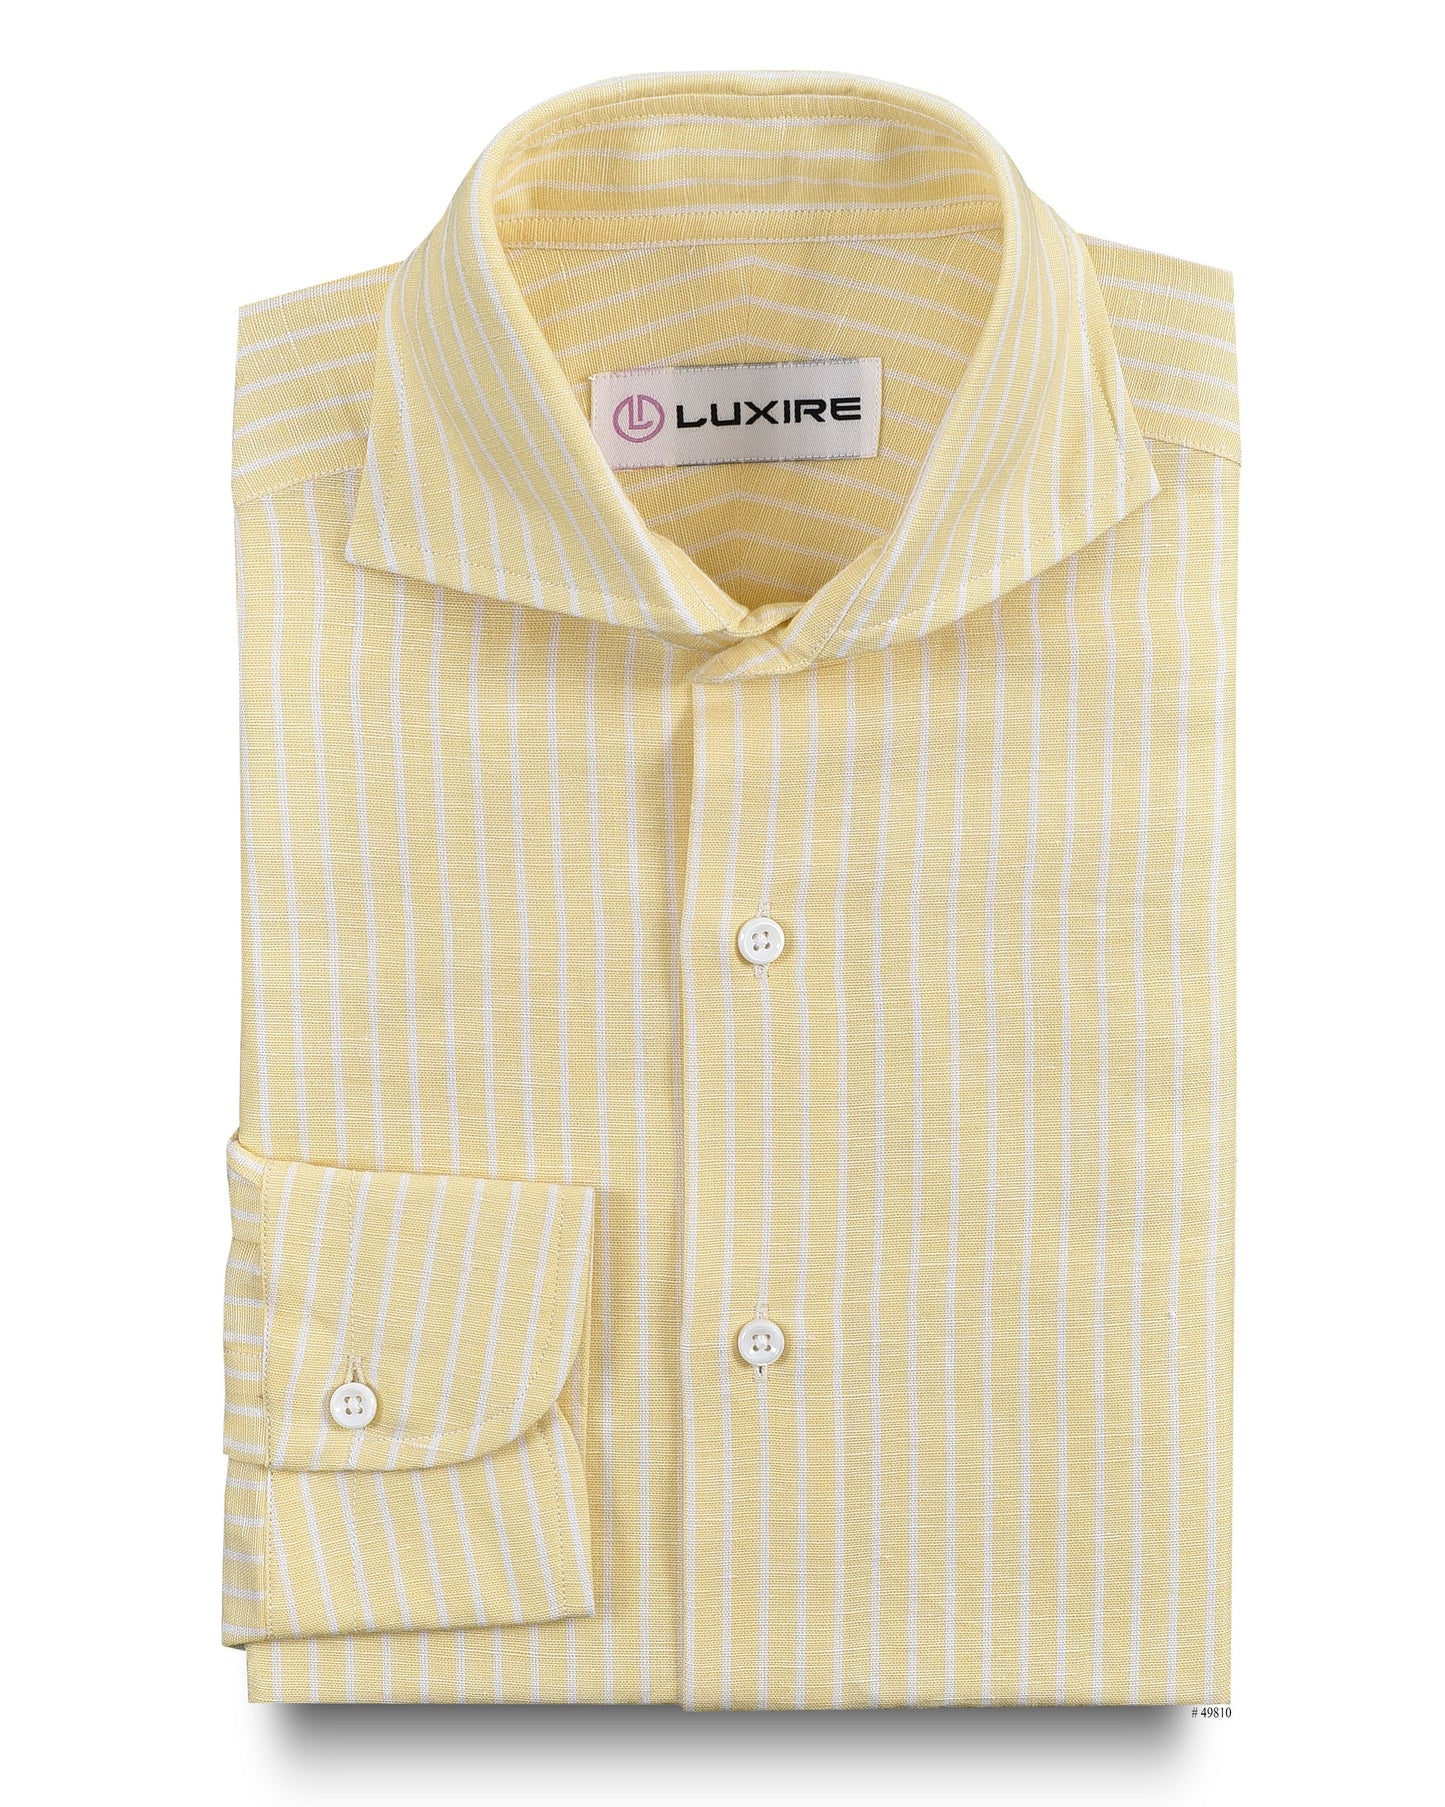 Front of the custom linen shirt for men in pastel yellow with white stripes by Luxire Clothing